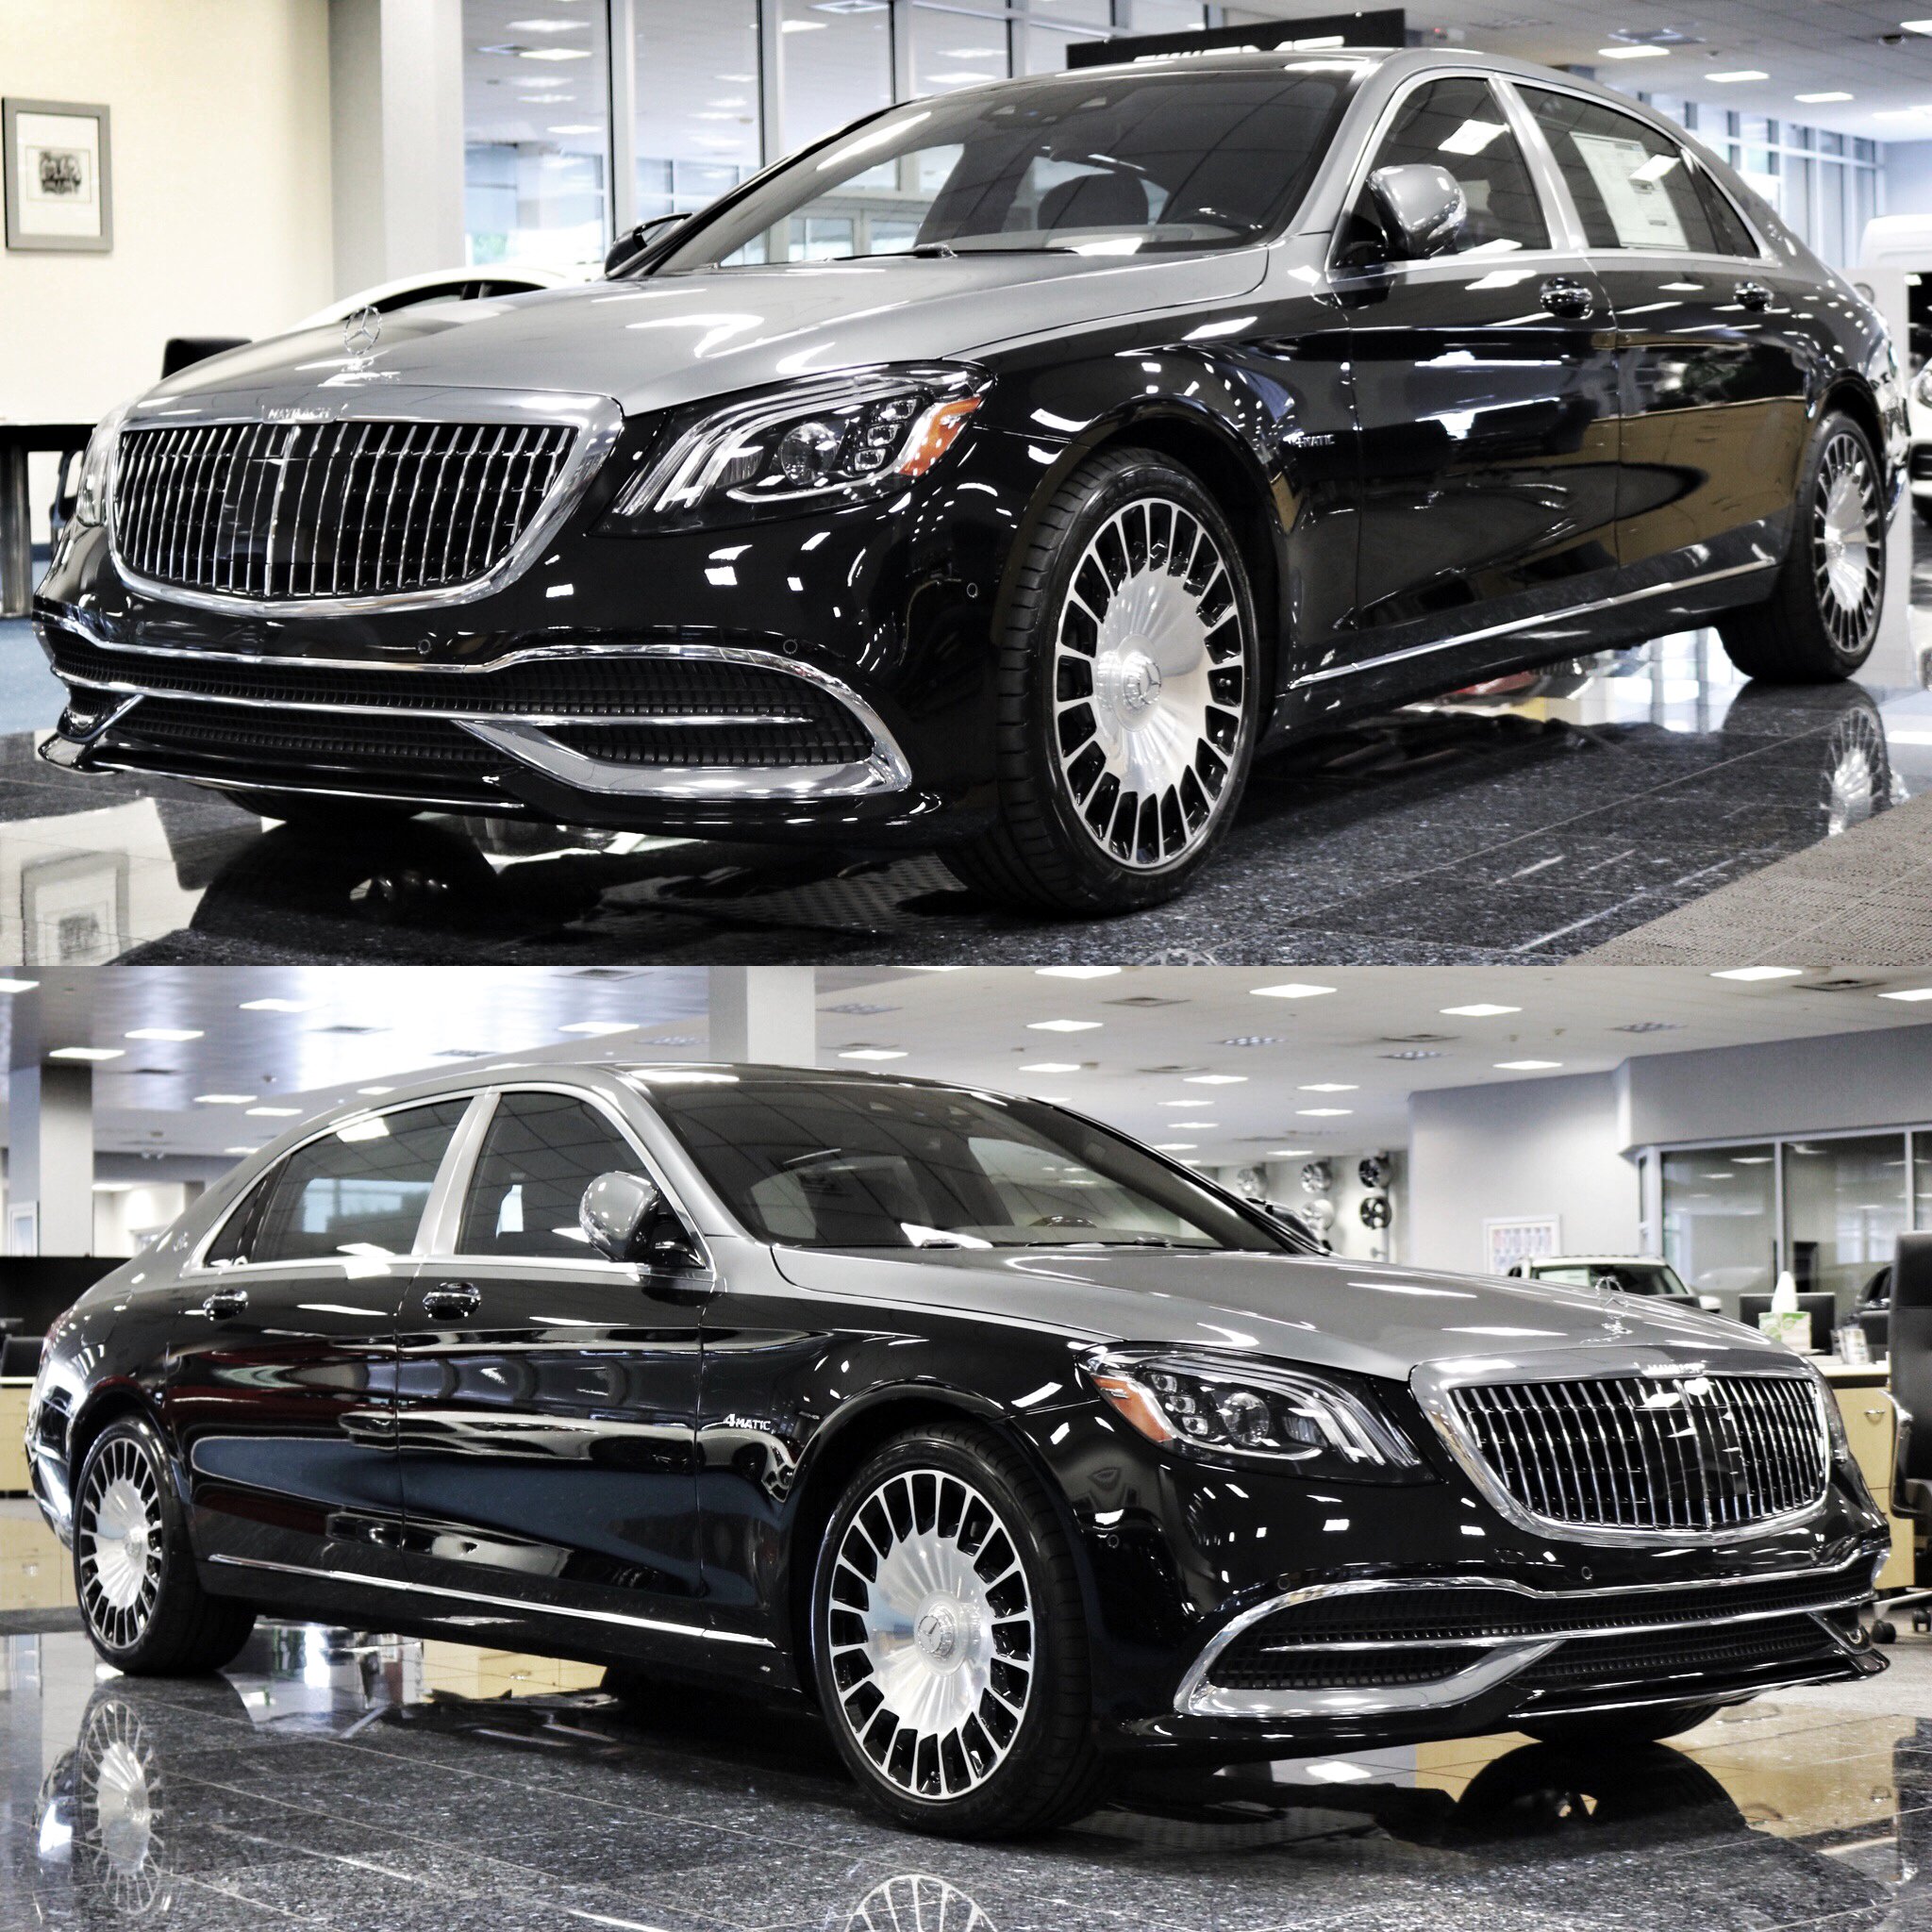 Mercedes-Benz of Union on Twitter: "The 2019 Mercedes-Maybach S 560 in Two  Tone: Selenite Grey/Obsidian Black is now on the showroom floor. #maybach # s560 #s560maybach #MB #MBUSA #mercedesclub #mercedeslove #luxurycars  #amazingcars #raycatenamercedes #